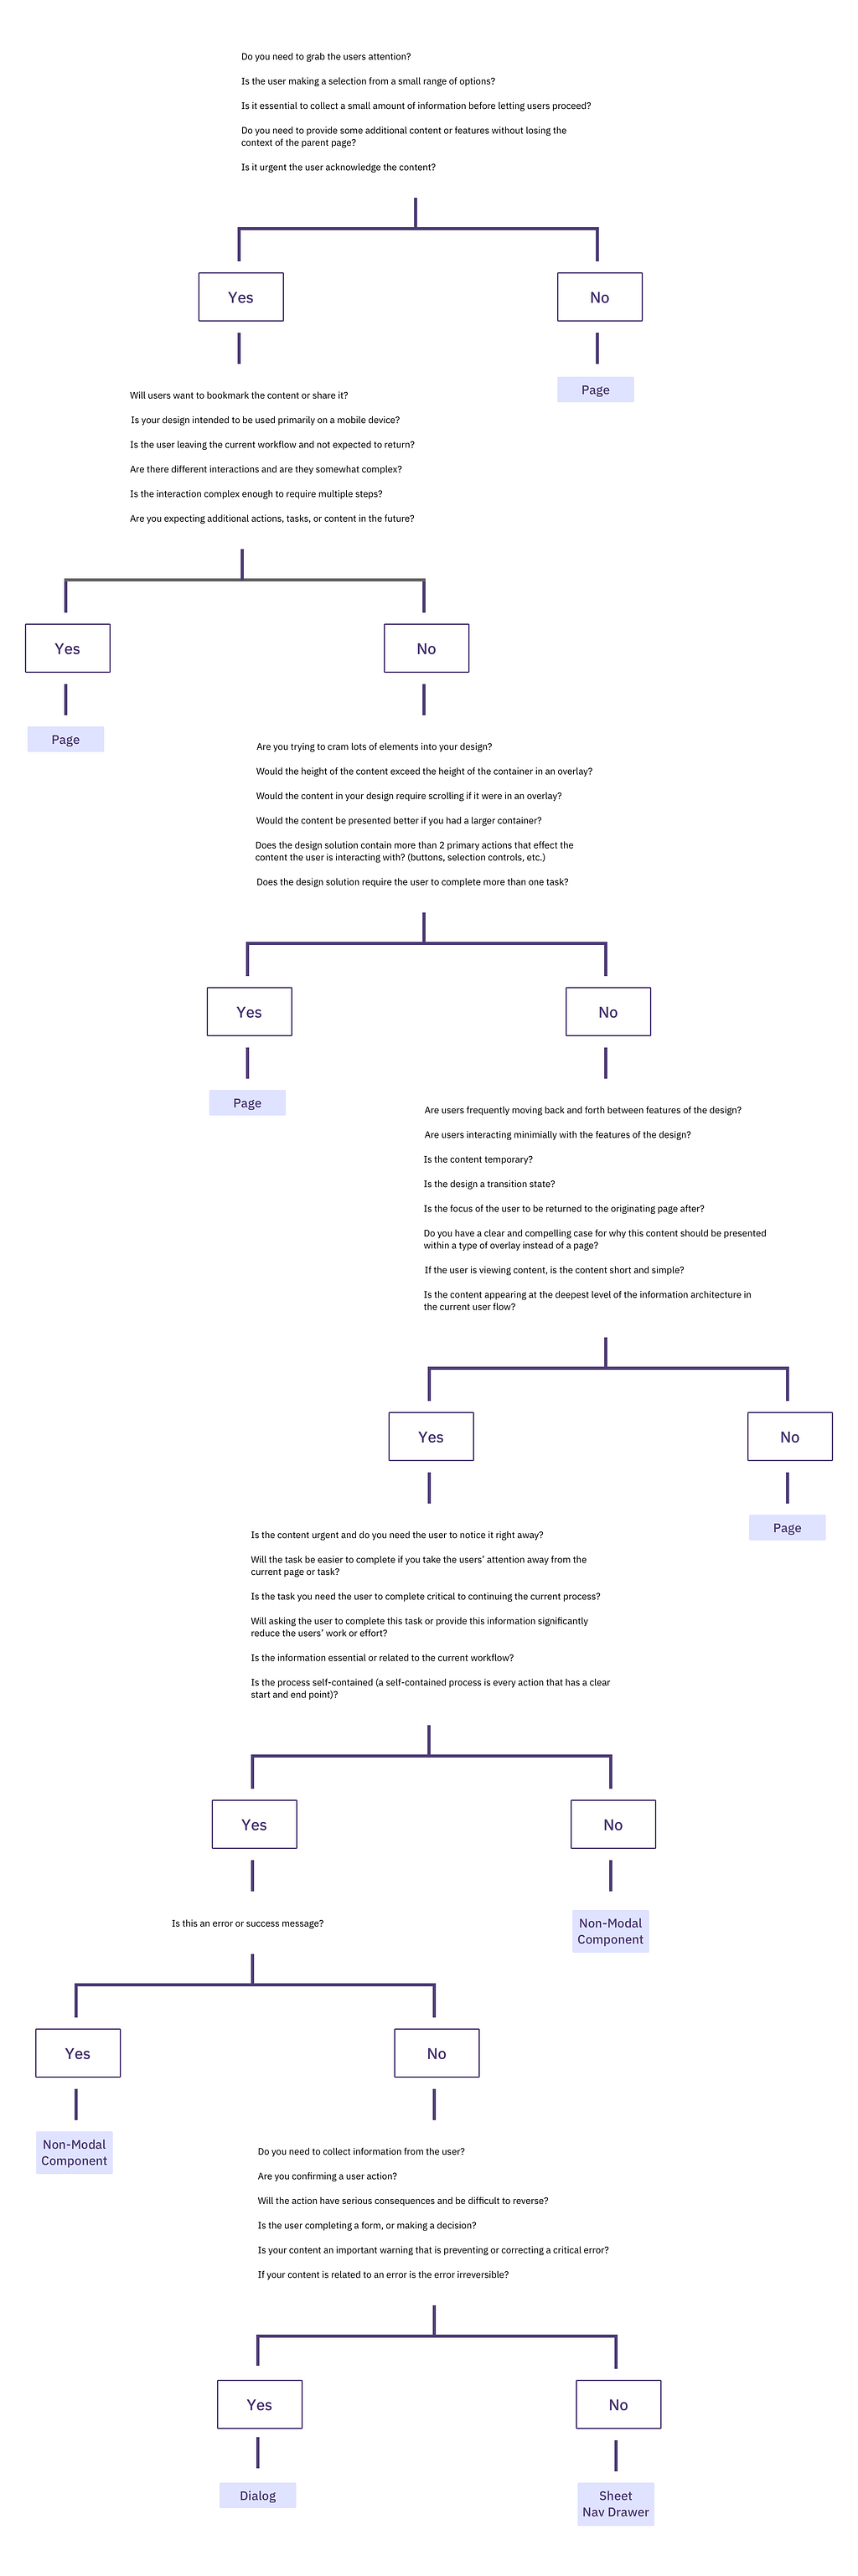 A large flowchart with multiple sections comprised of multiple questions.